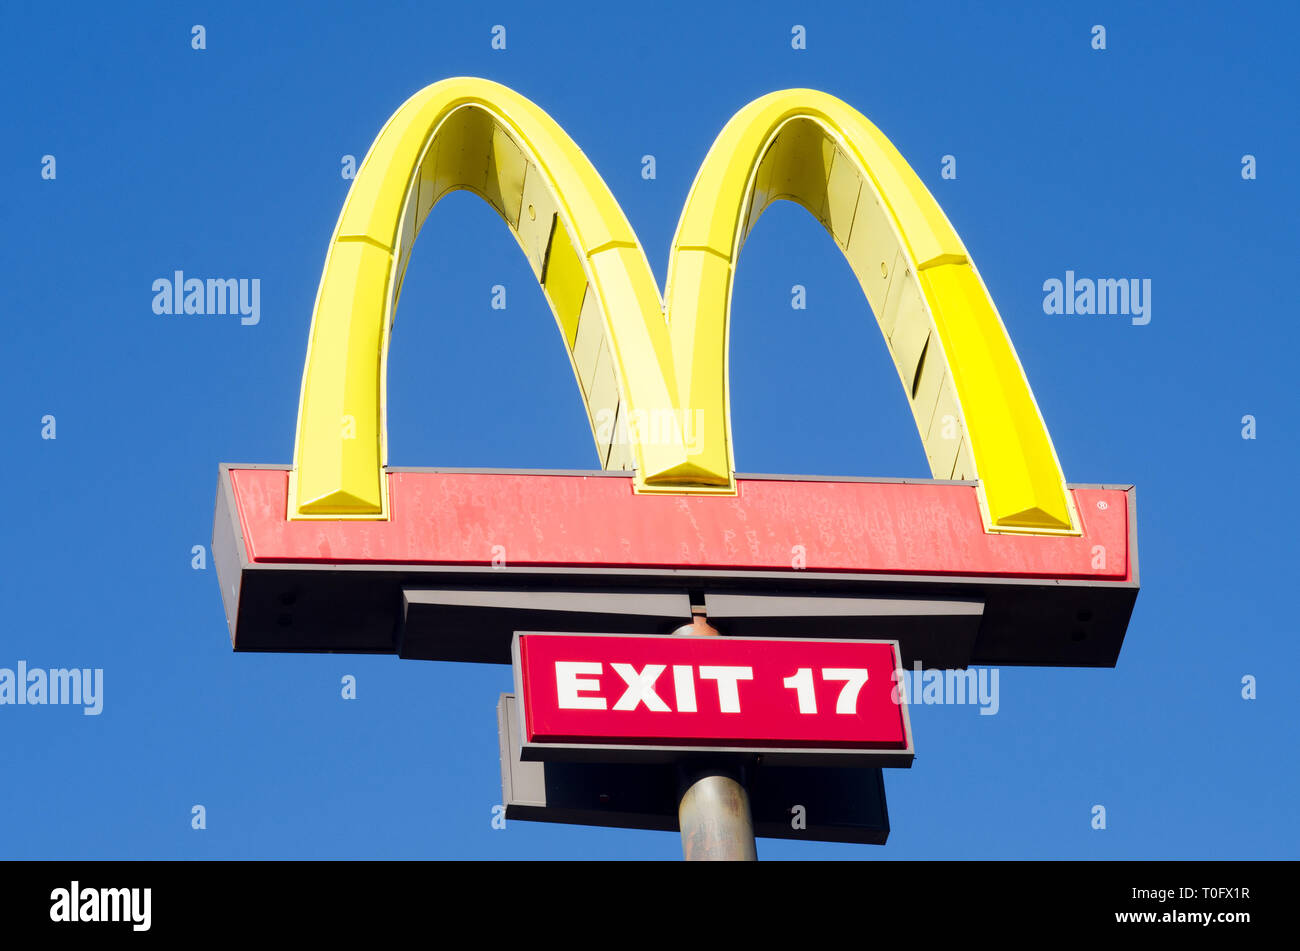 Looking up at McDonalds Golden Arches sign against a clear, deep blue sky Stock Photo